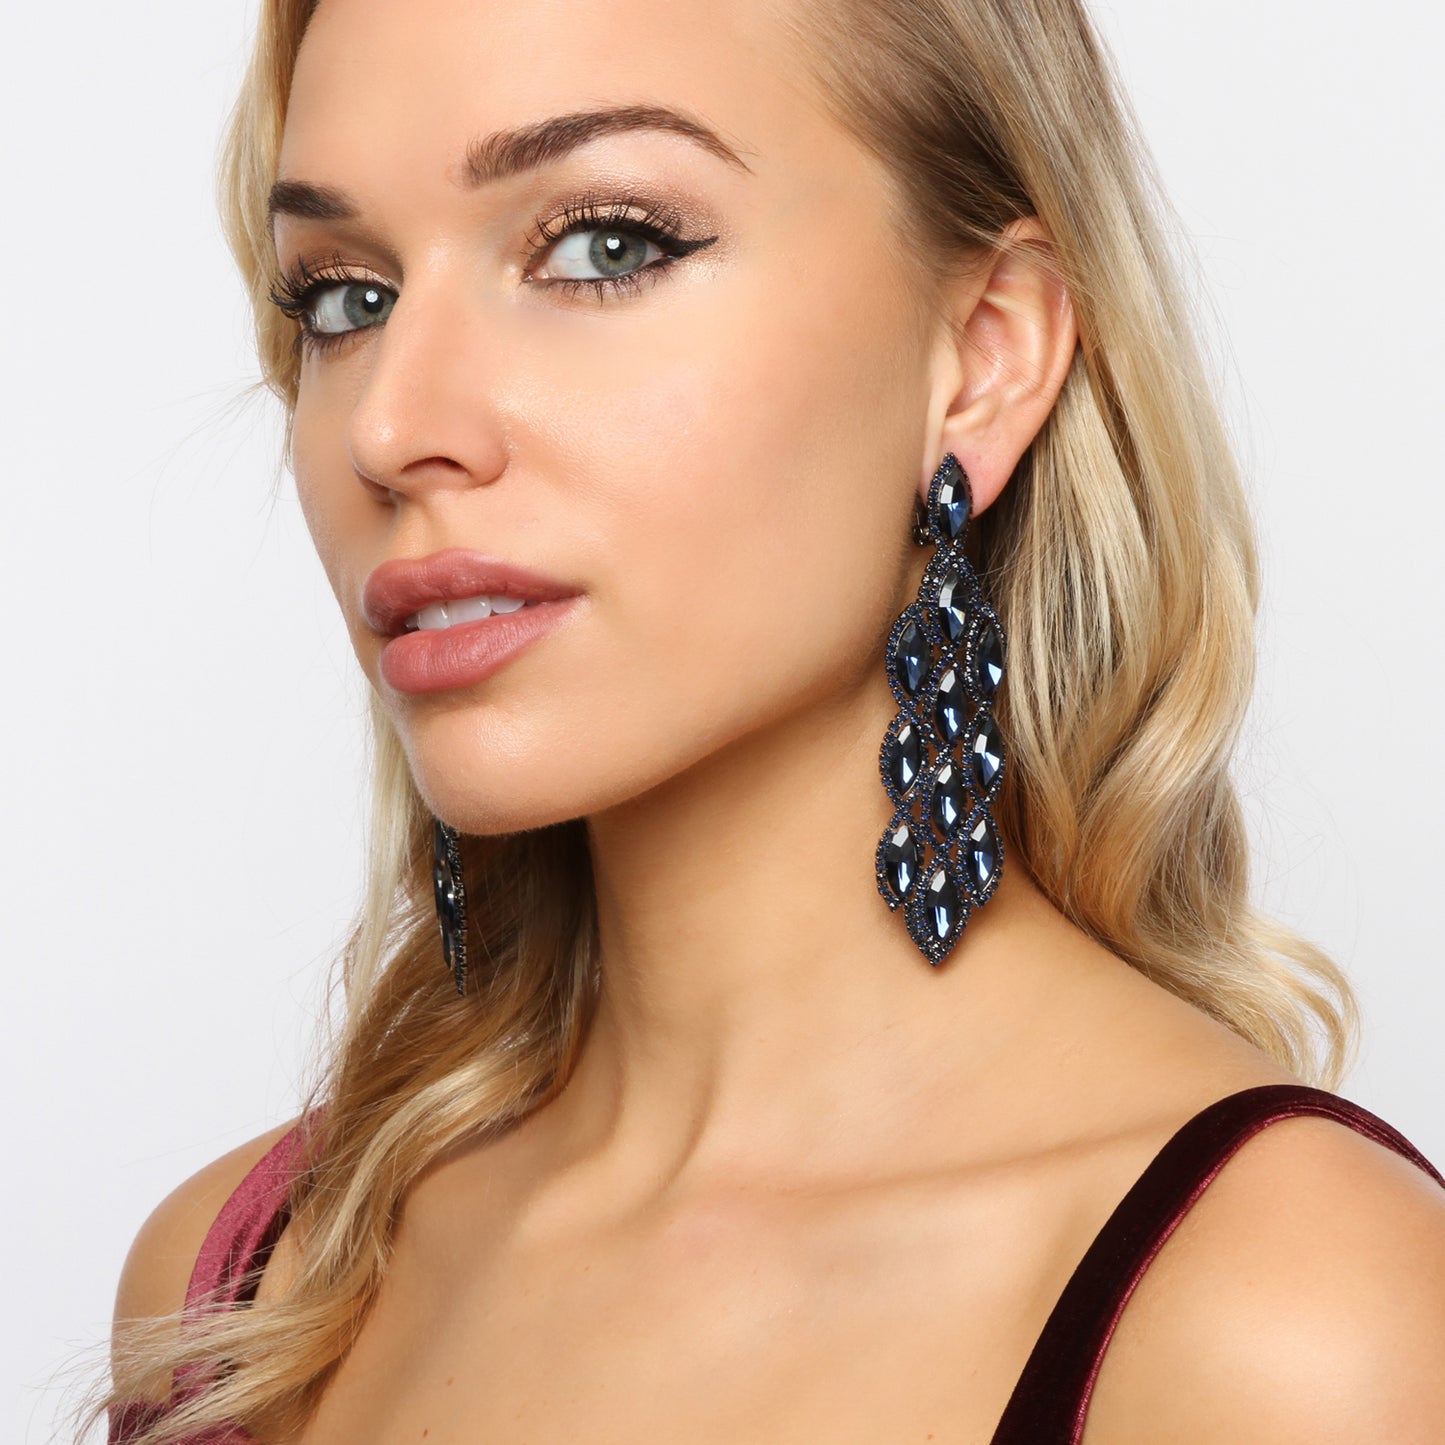 Esther Marquise Stone Drop Clip-on Earrings